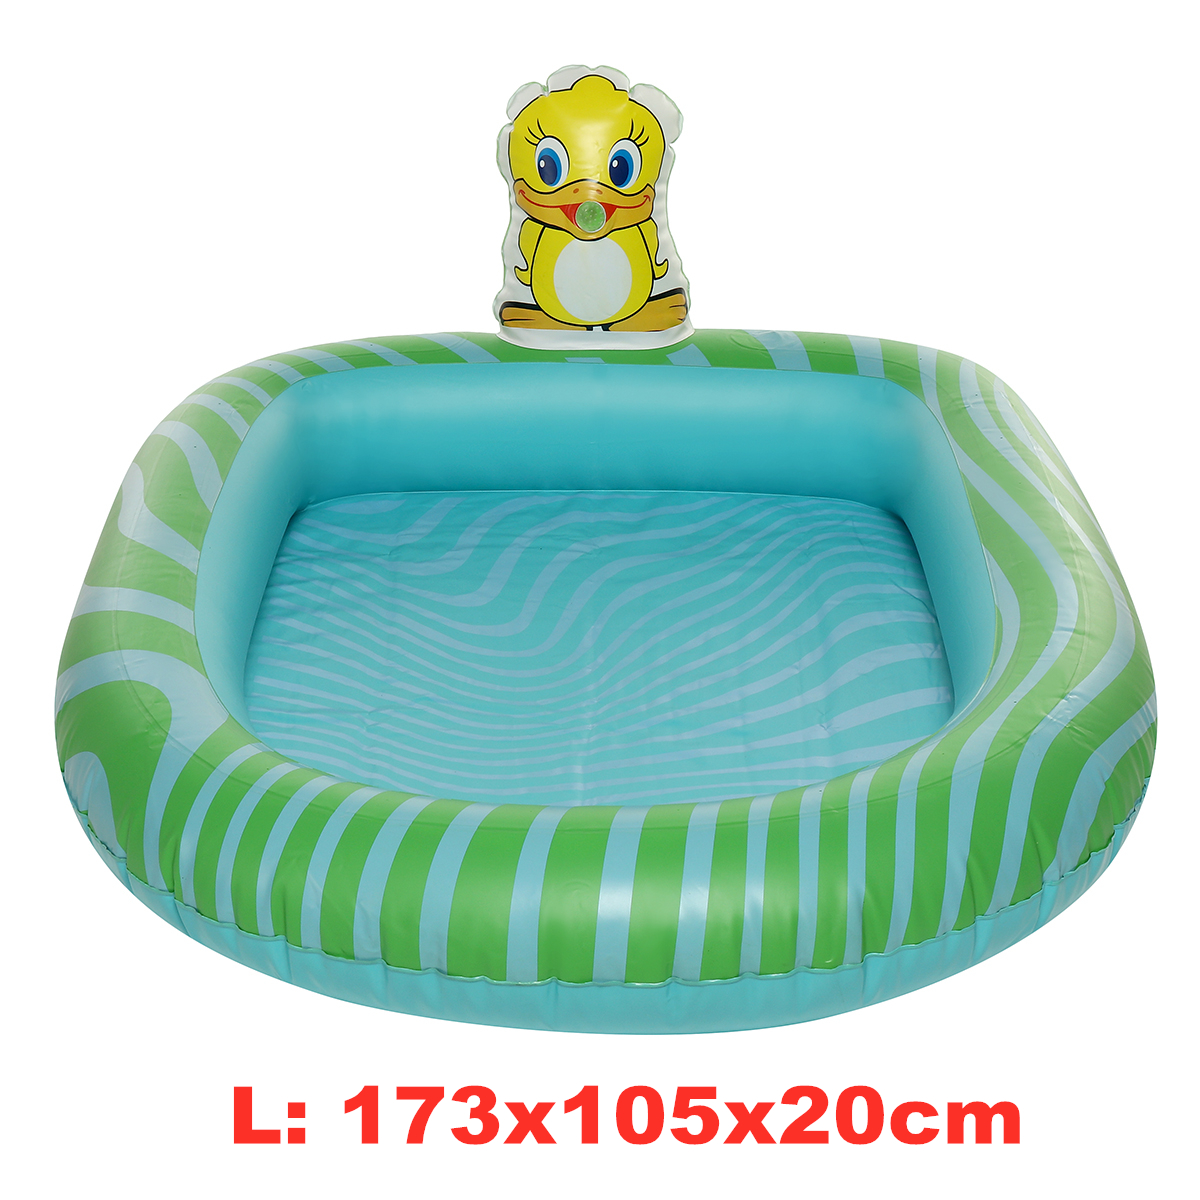 PVC-Children-Inflatable-Swimming-Pool-Sprinkler-Pool-Thickened-Cartoon-Pattern-Outdoor-Swimming-Wate-1851764-12